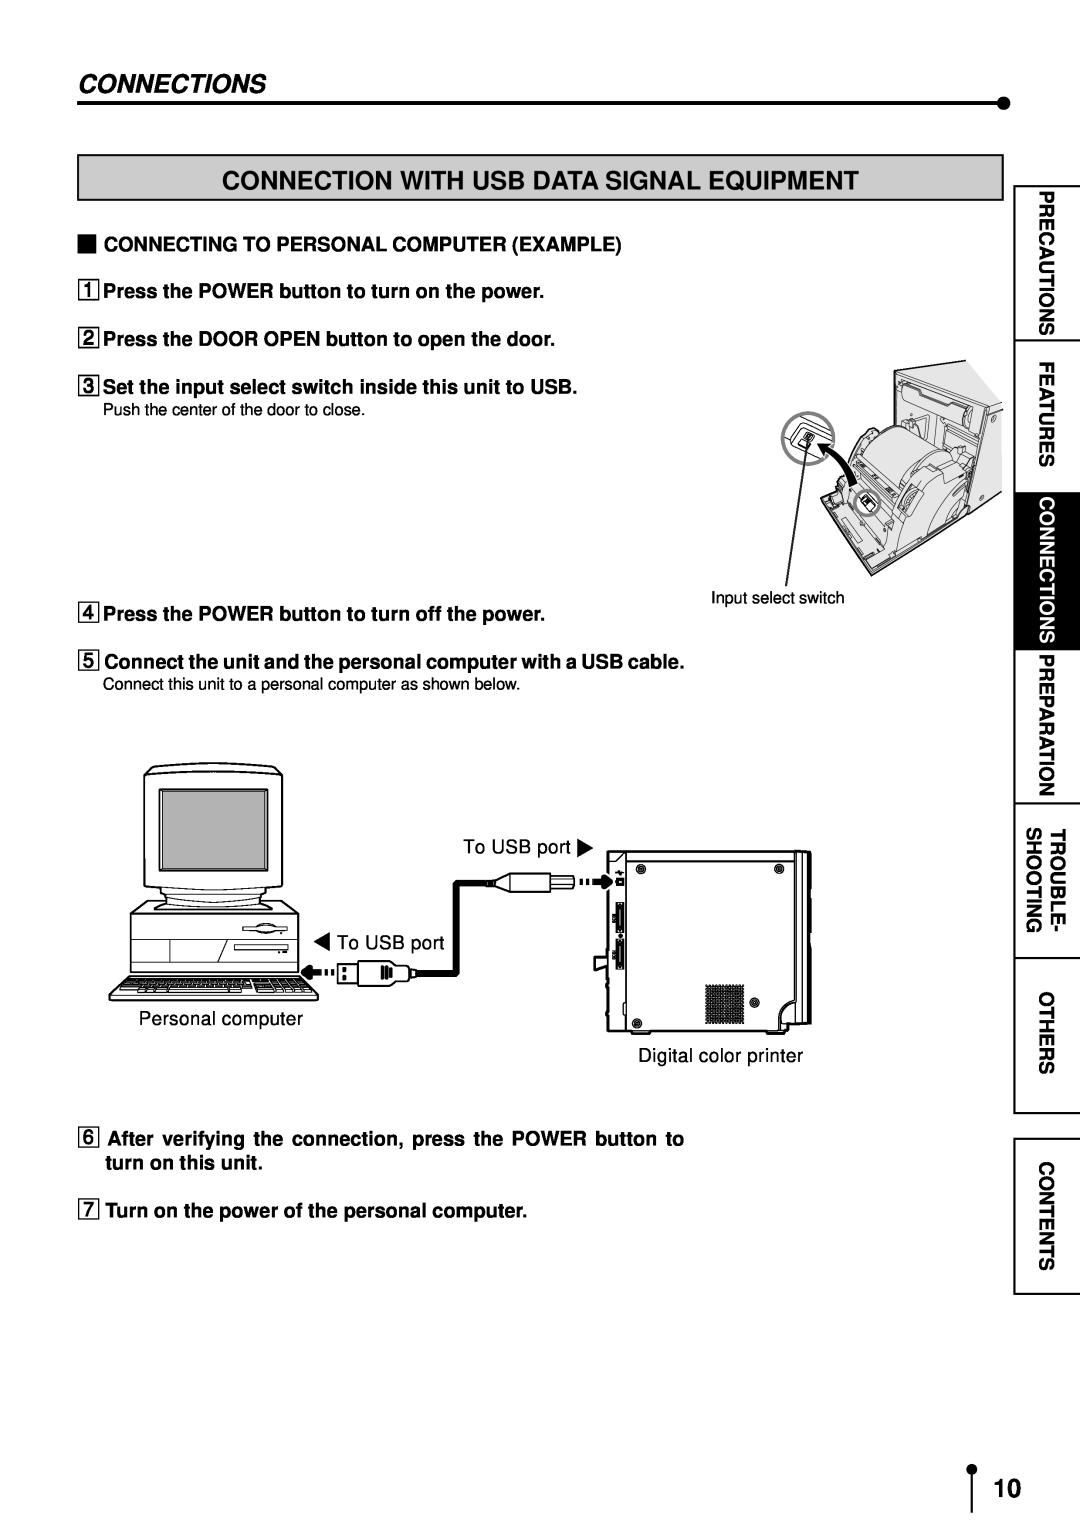 Mitsubishi Electronics CP9500DW operation manual Connections, Connection With Usb Data Signal Equipment, Contents 